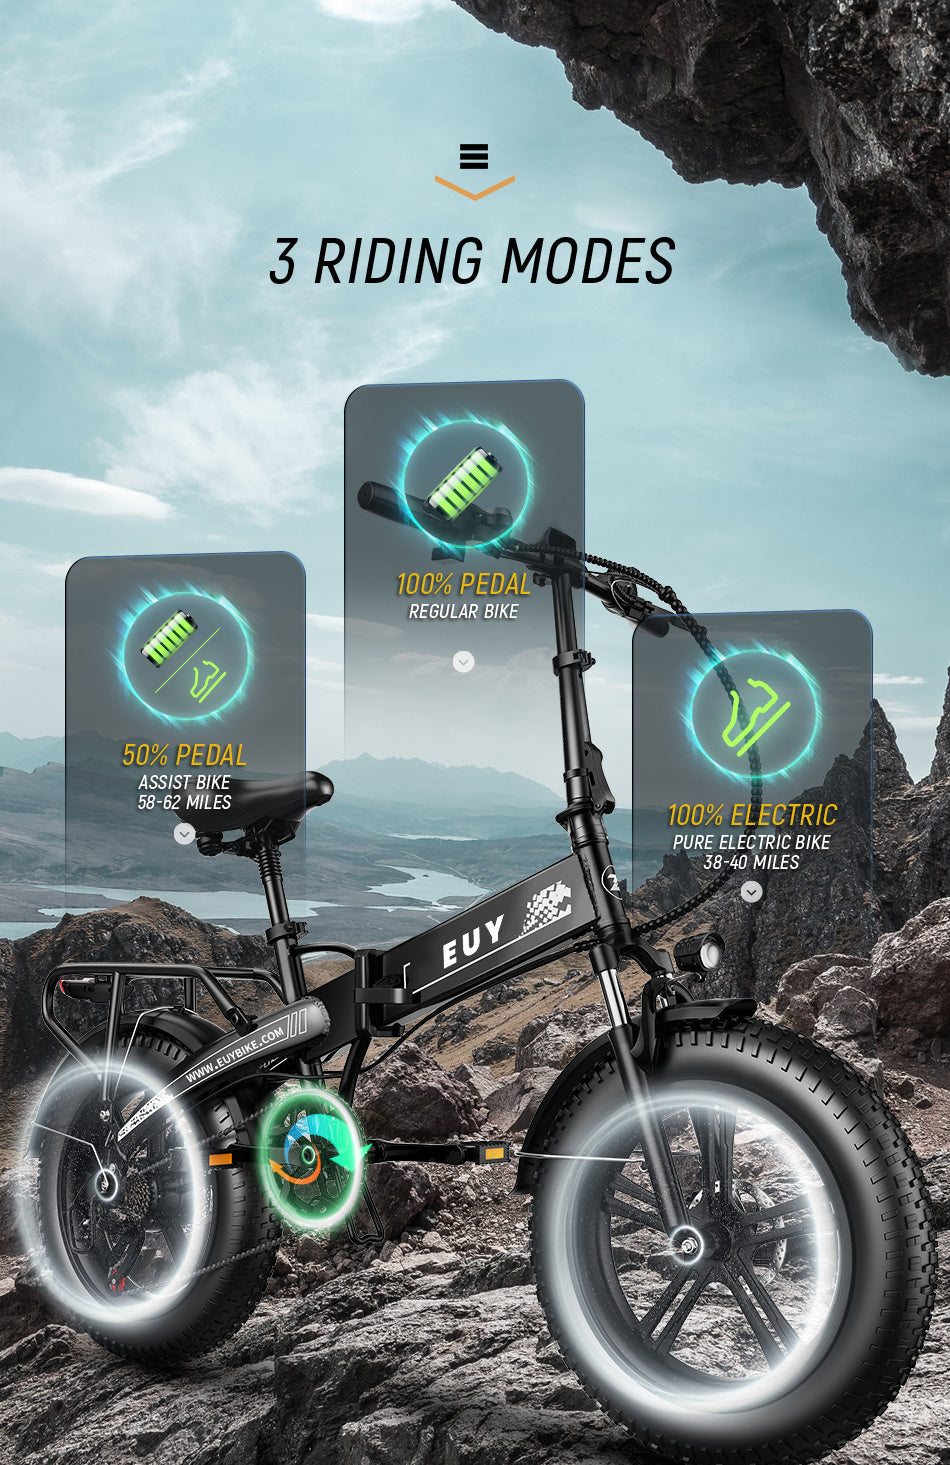 20" x 4.0" All Terrain Fat Tire Electric bike with Samsung 48V 12.8Ah Lithium Battery, riding modes